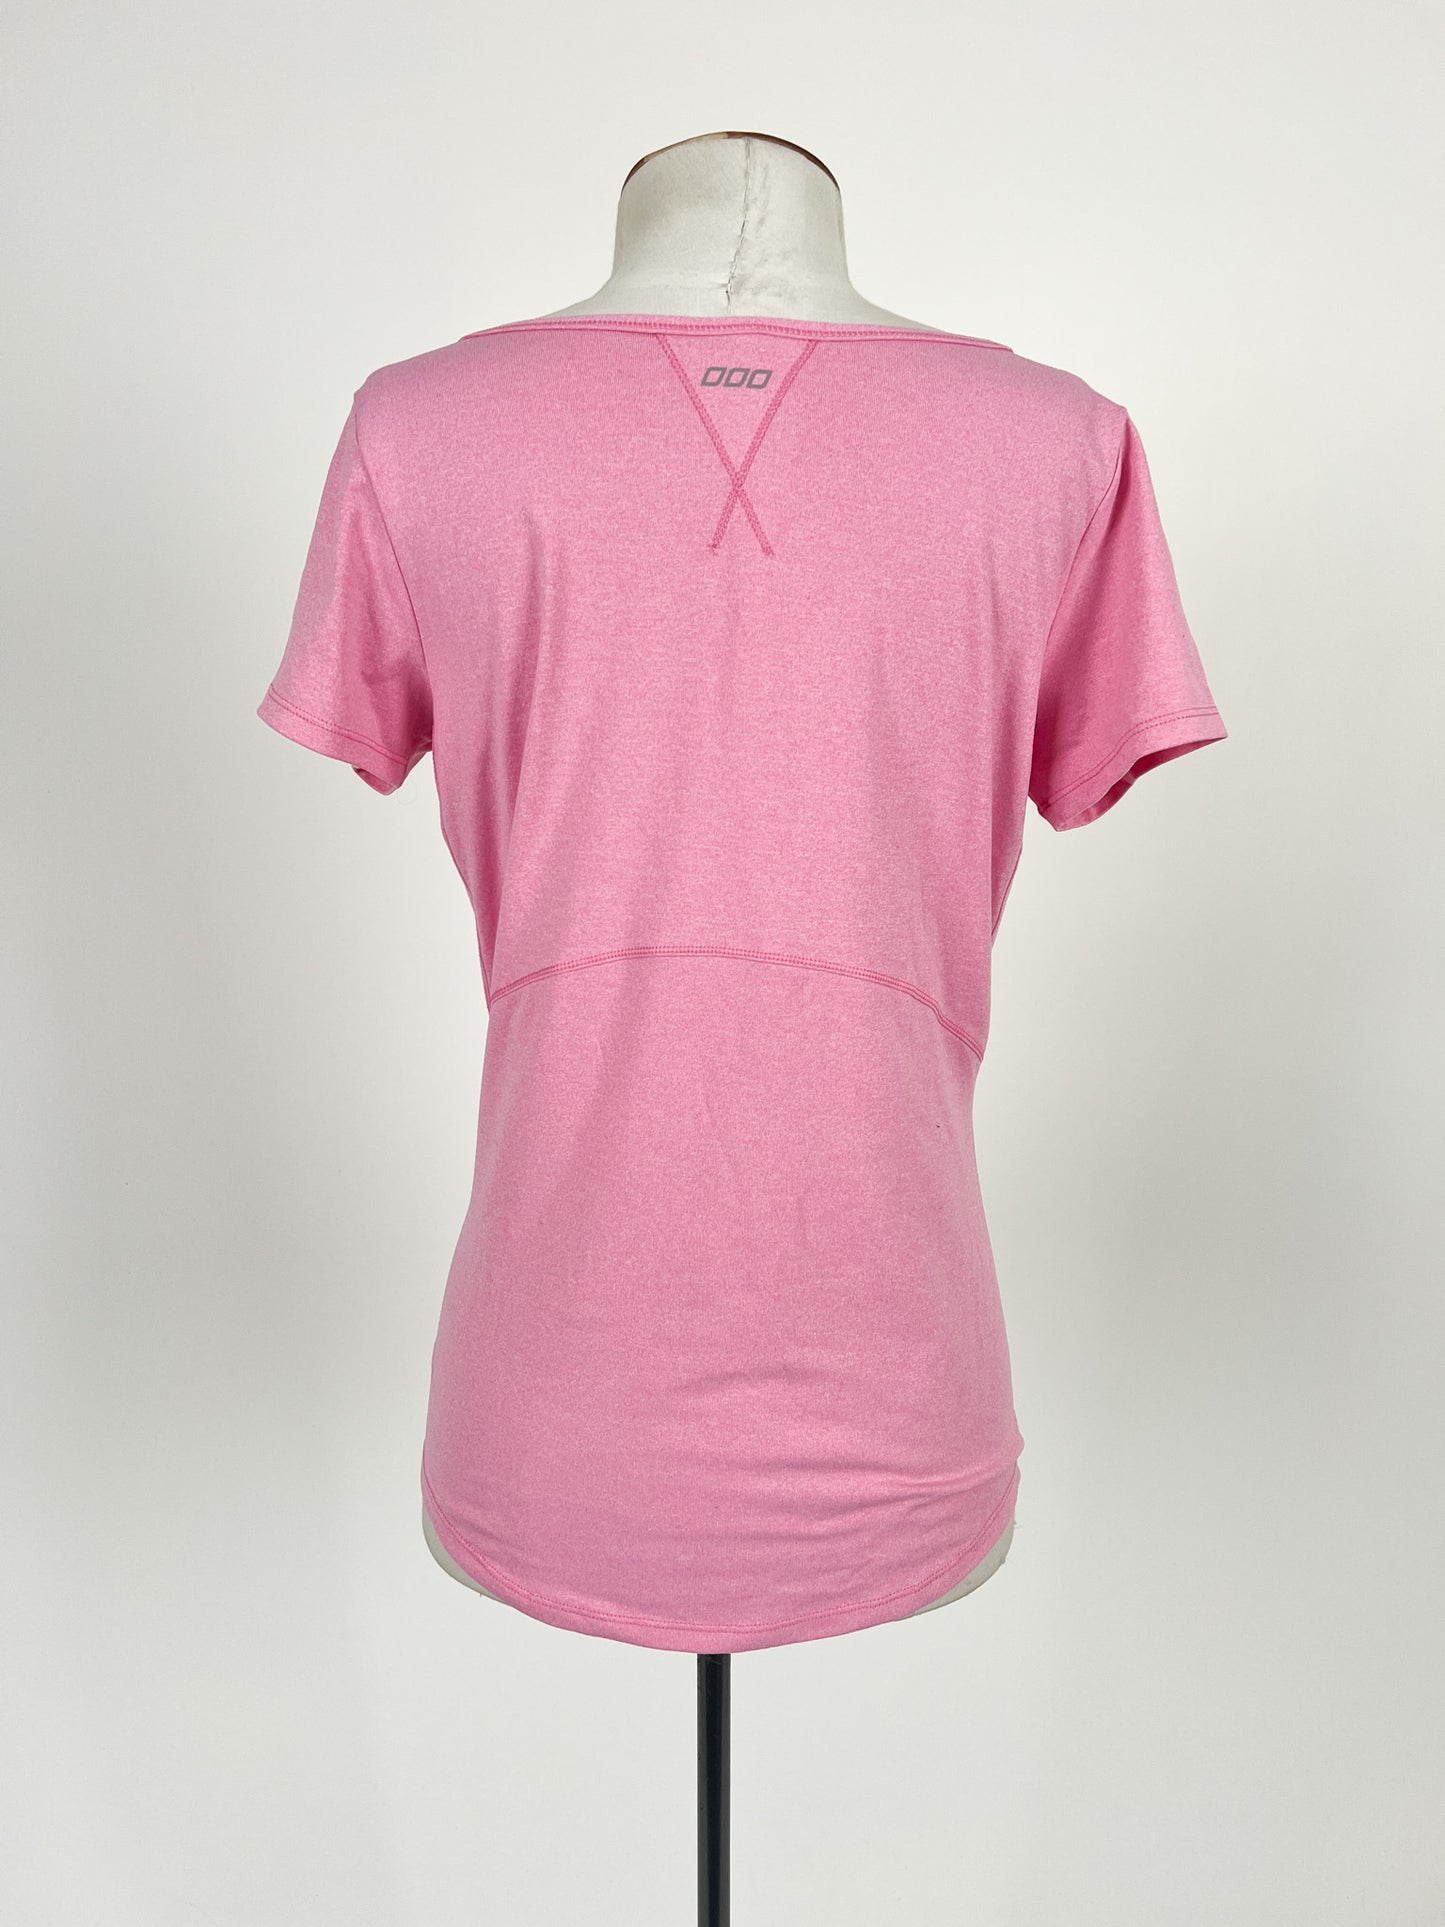 Lorna Jane | Pink Casual Activewear Top | Size M